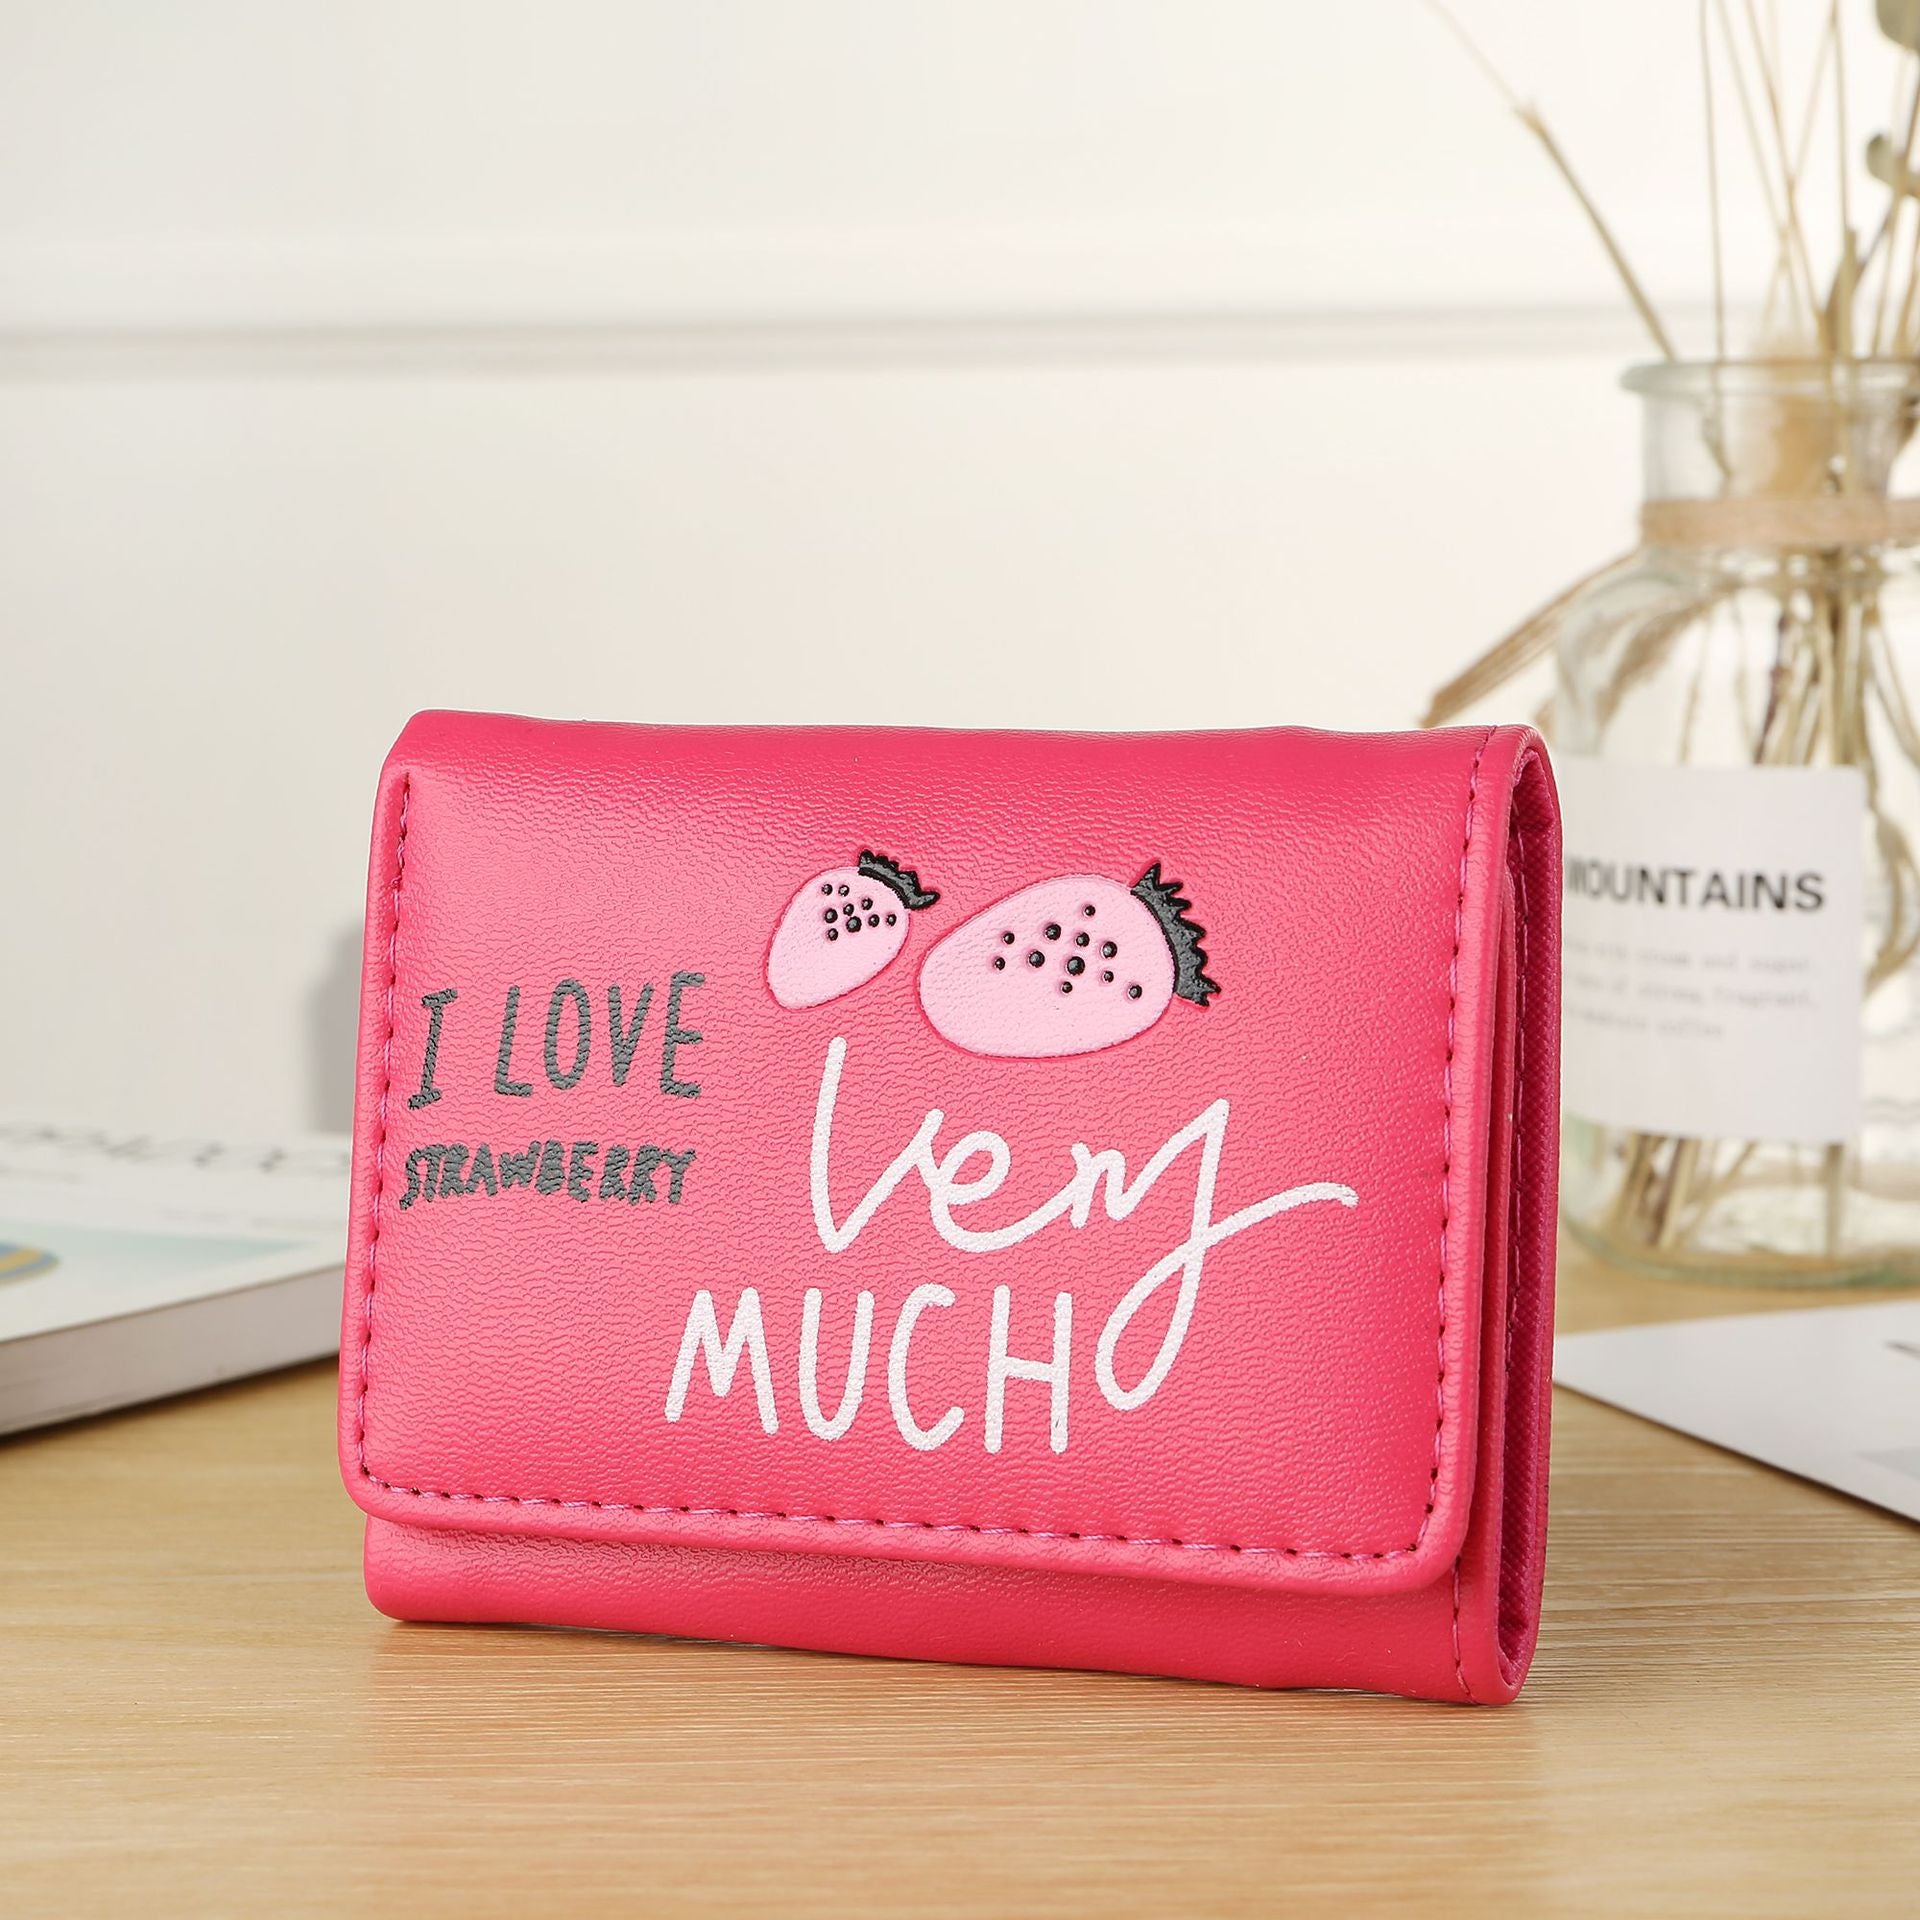 Small wallet for women